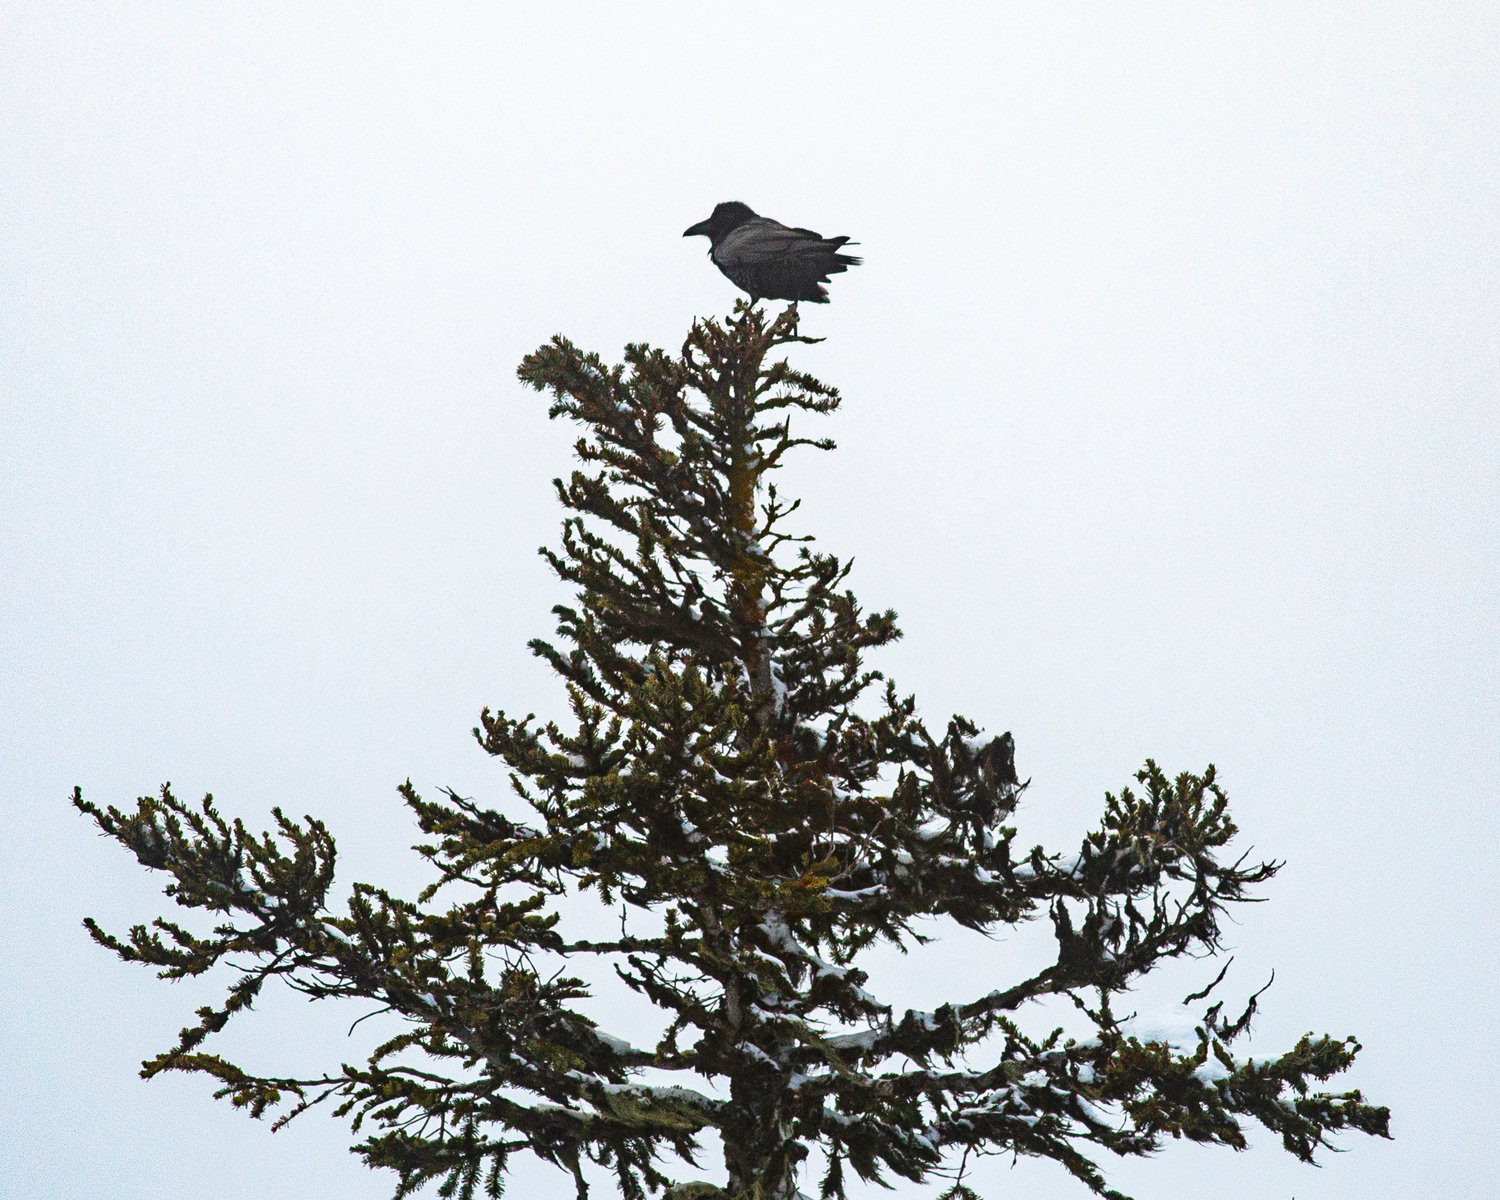 A raven sits stop an evergreen tree beside U.S. Highway 12 at White Pass Ski Area.